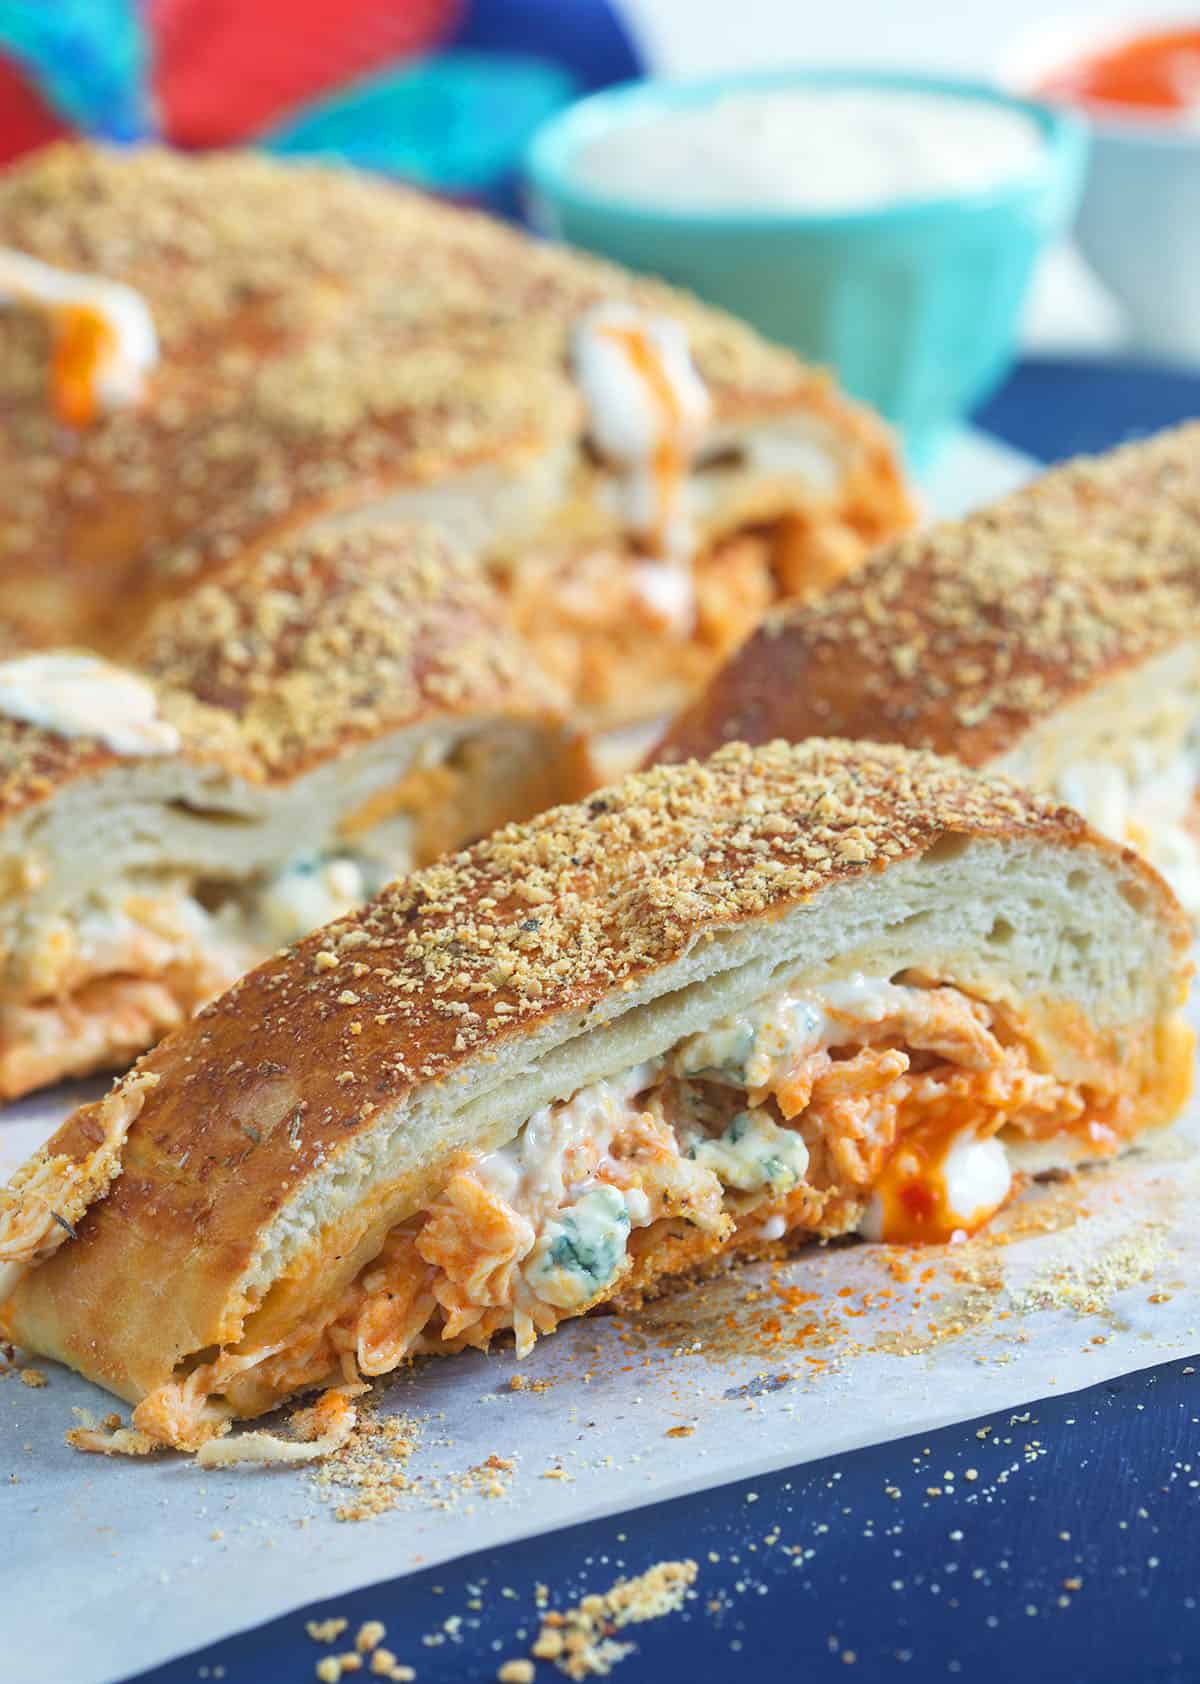 Slices of stromboli are placed on a sheet of parchment paper.